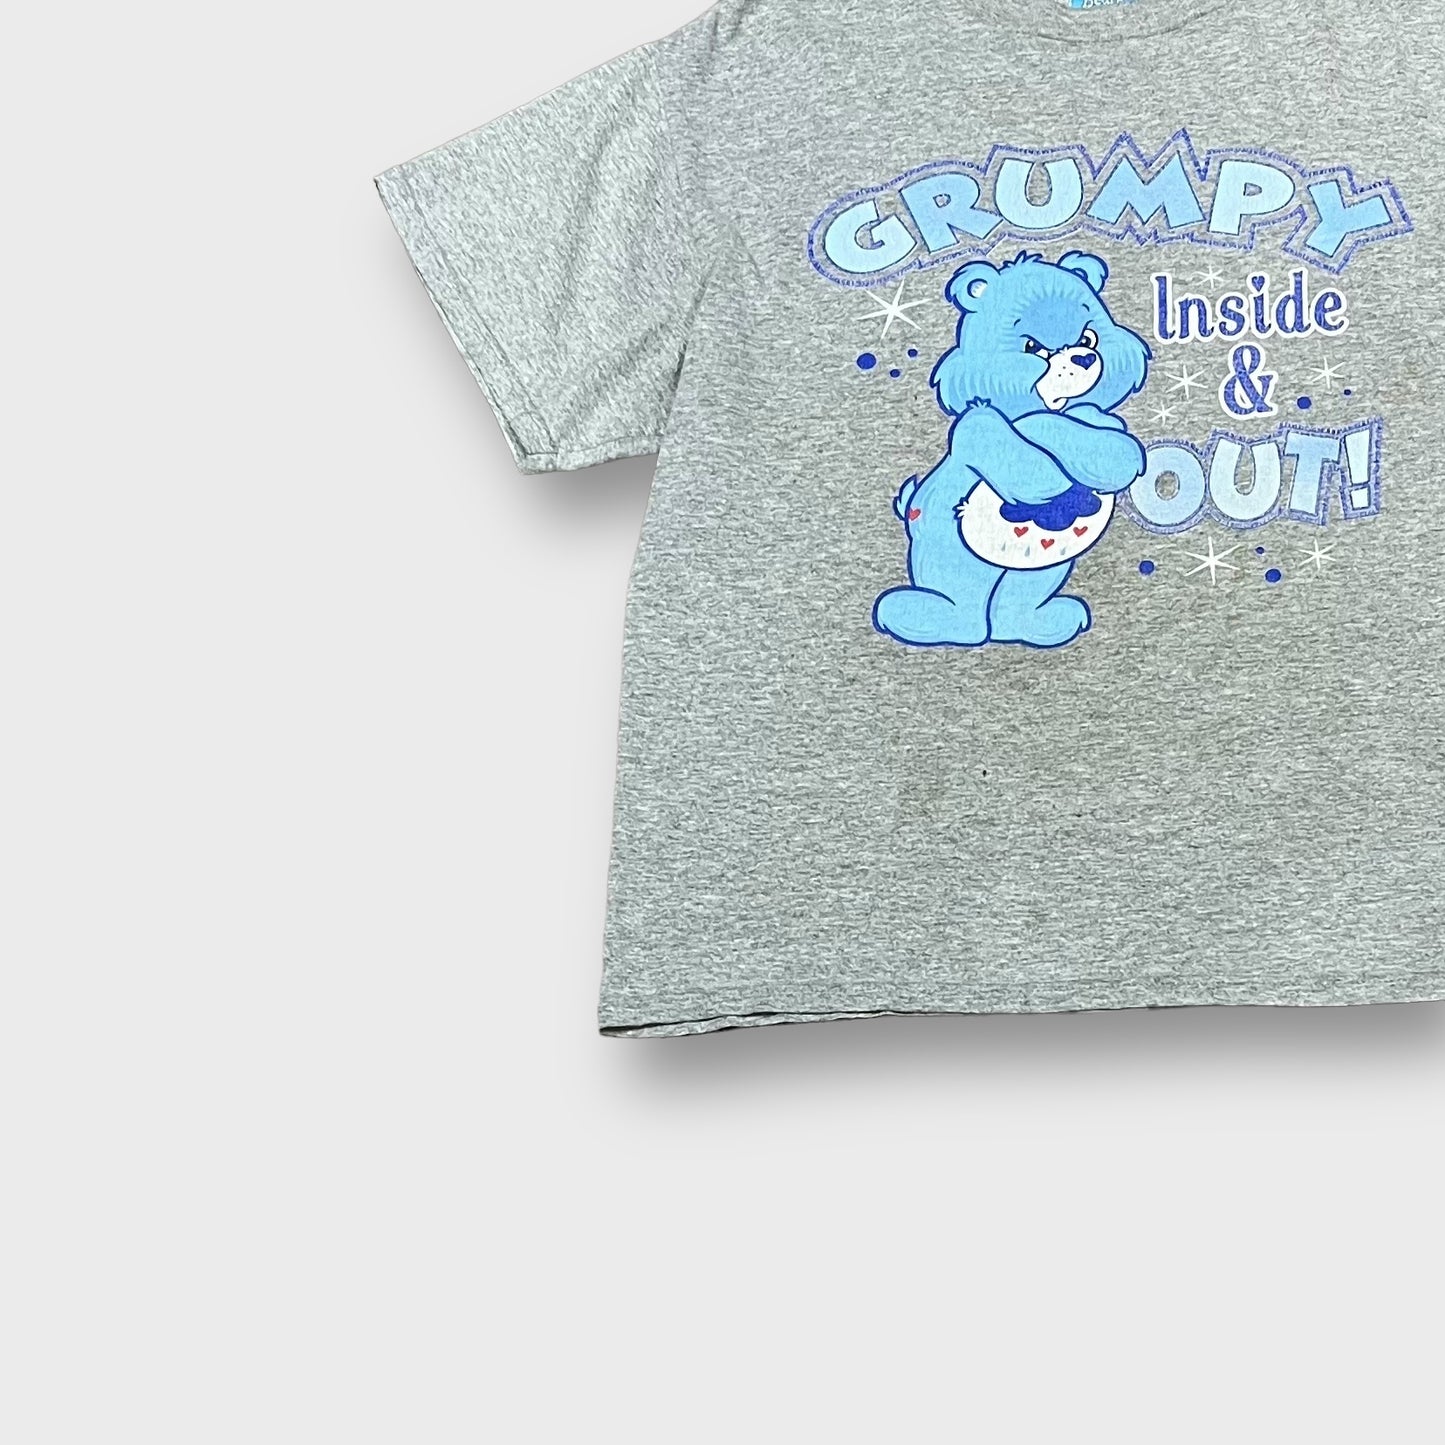 00’s “Care Bears”
Character t-shirt